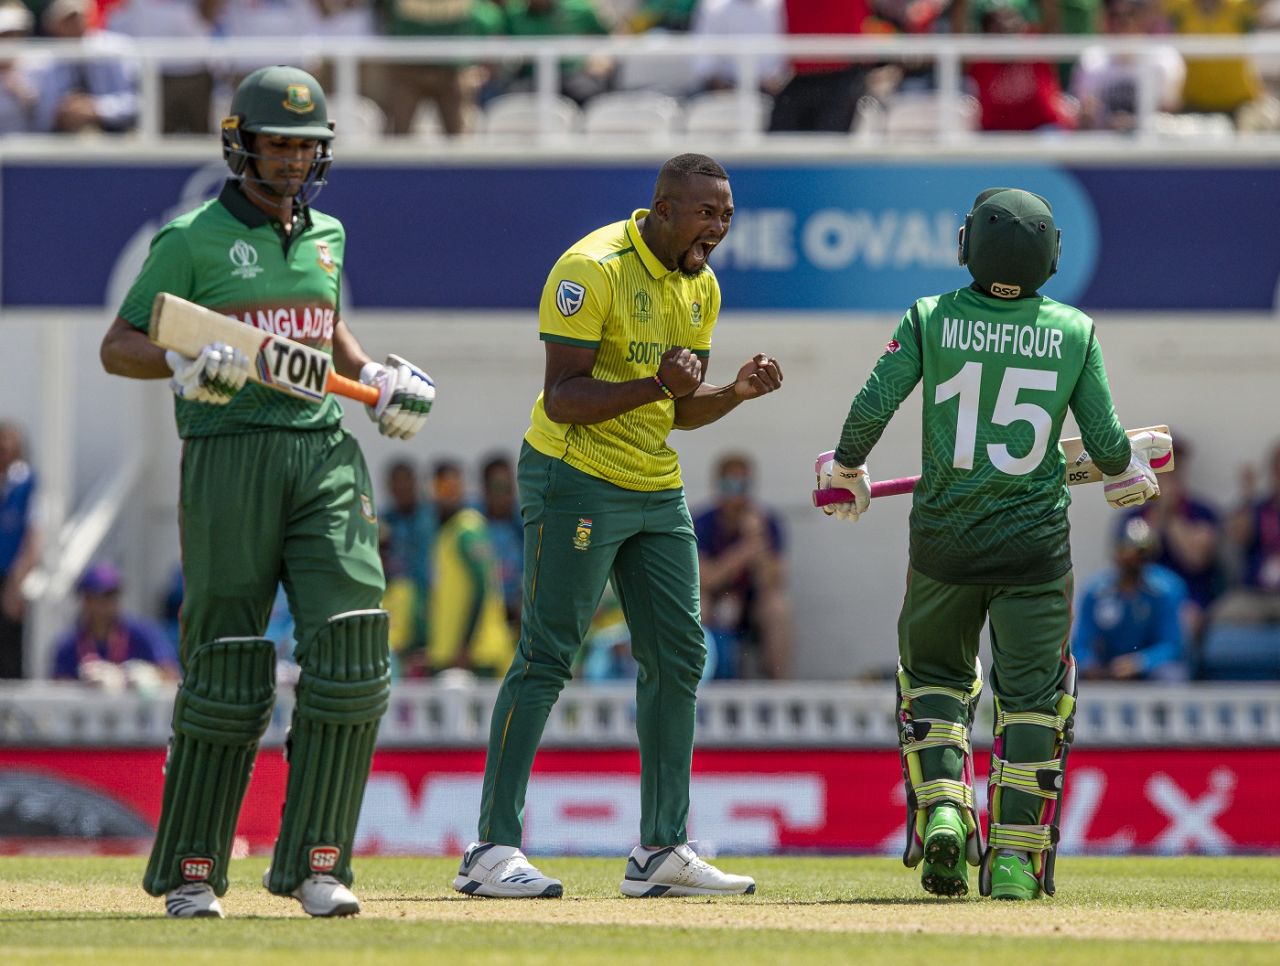 Andile Phehlukwayo celebrates after taking the wicket of Mushfiqur Rahim, Bangladesh v South Africa, World Cup 2019, The Oval, June 2, 2019